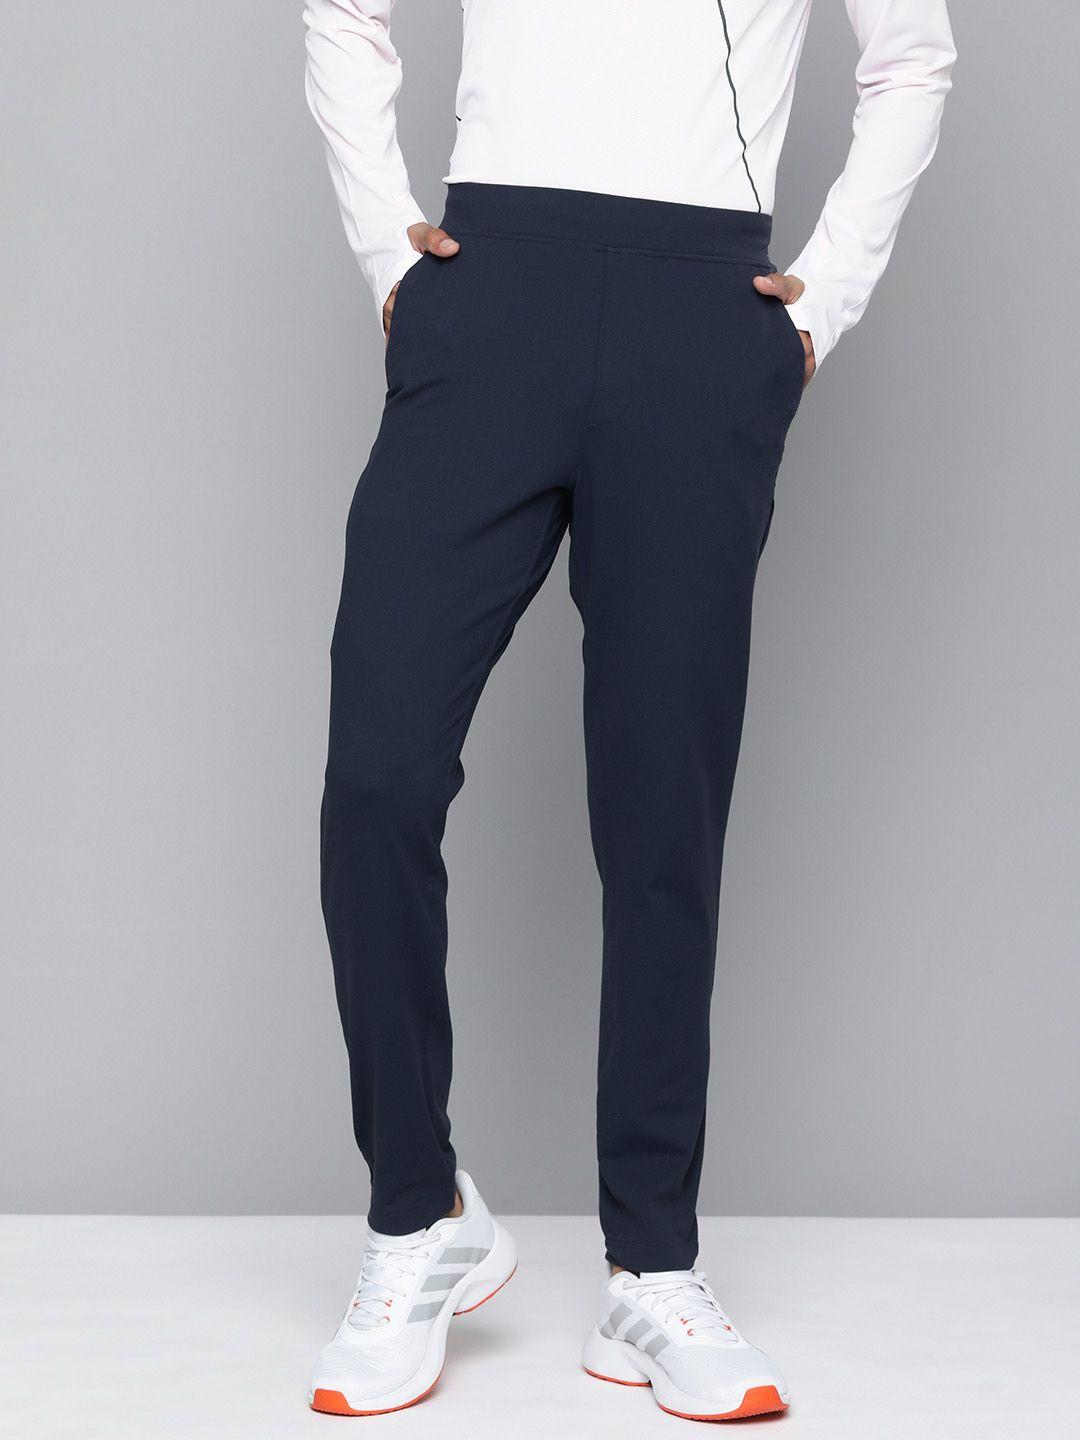 skechers-men-the-gowalk-mid-rise-tapered-fit-track-pants